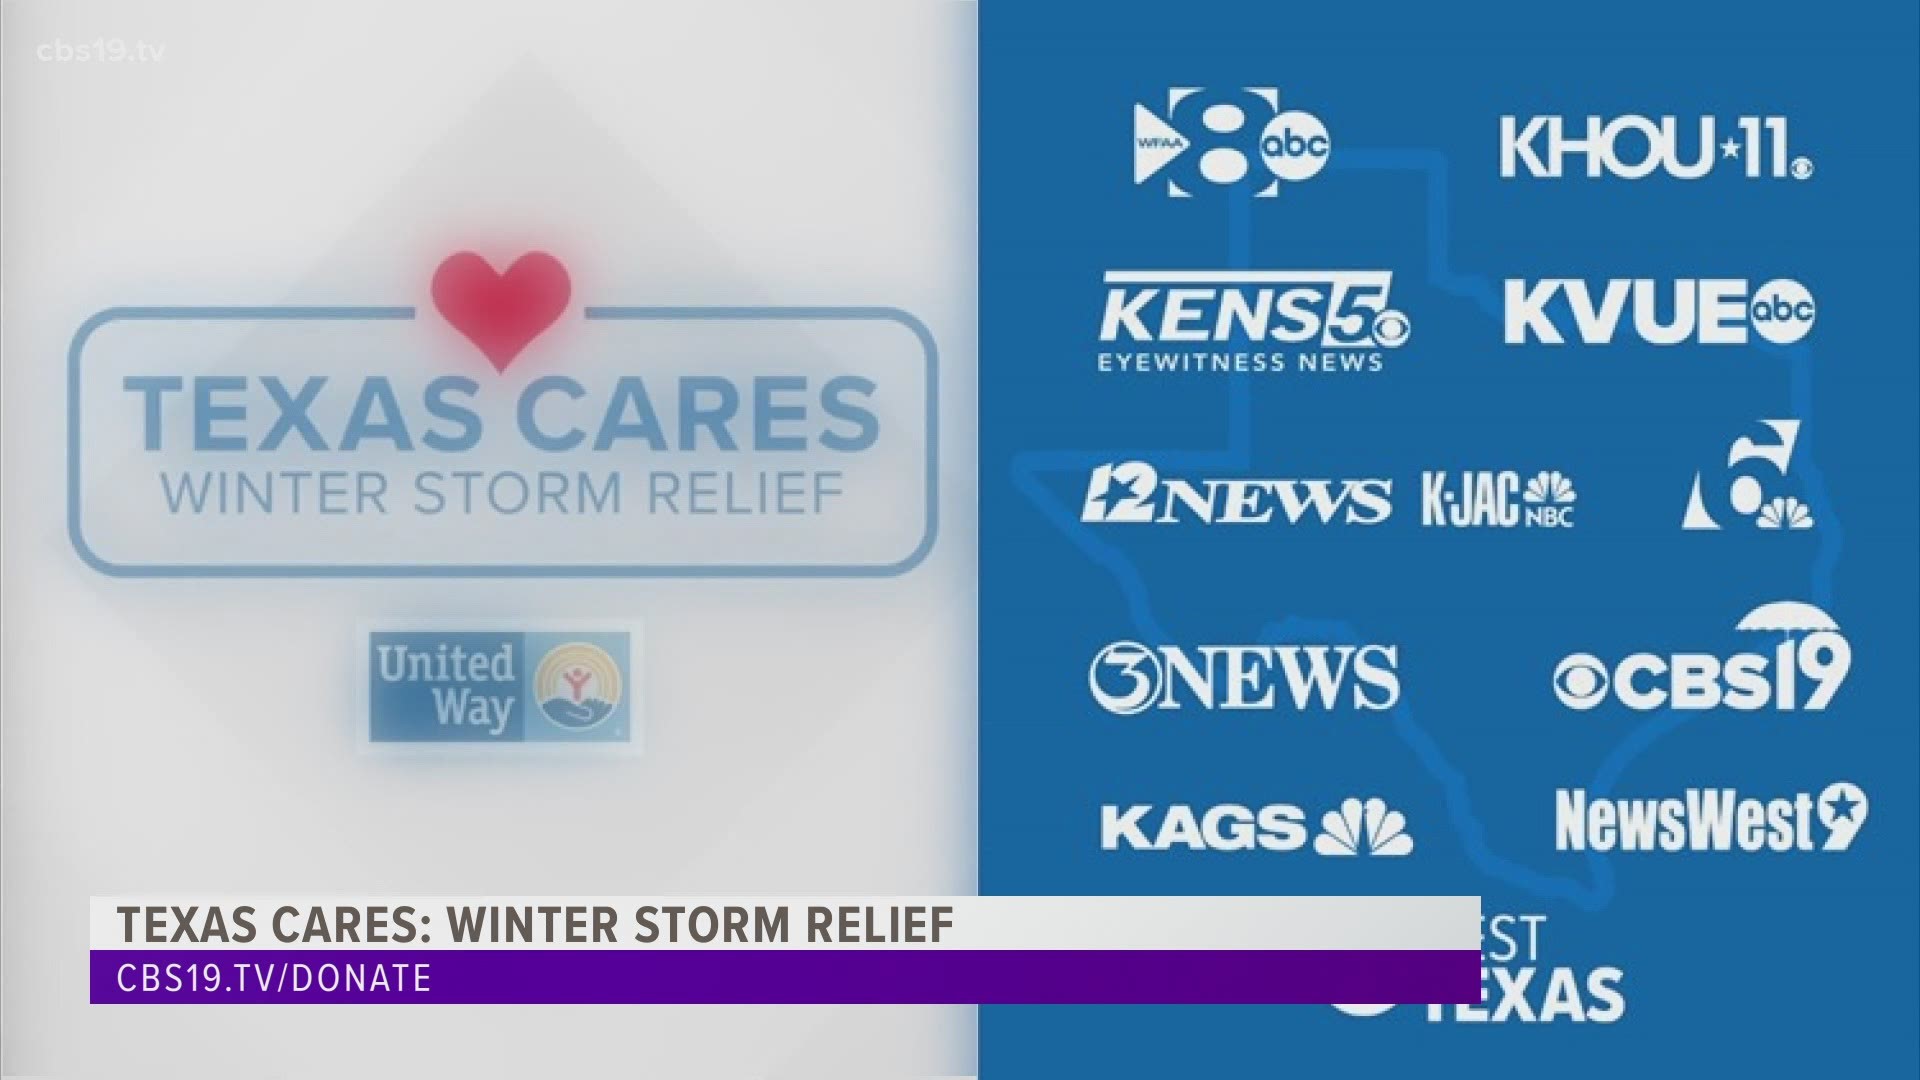 Donations received through the Texas Cares: Winter Storm Relief campaign will be distributed to the network of United Ways throughout the state.